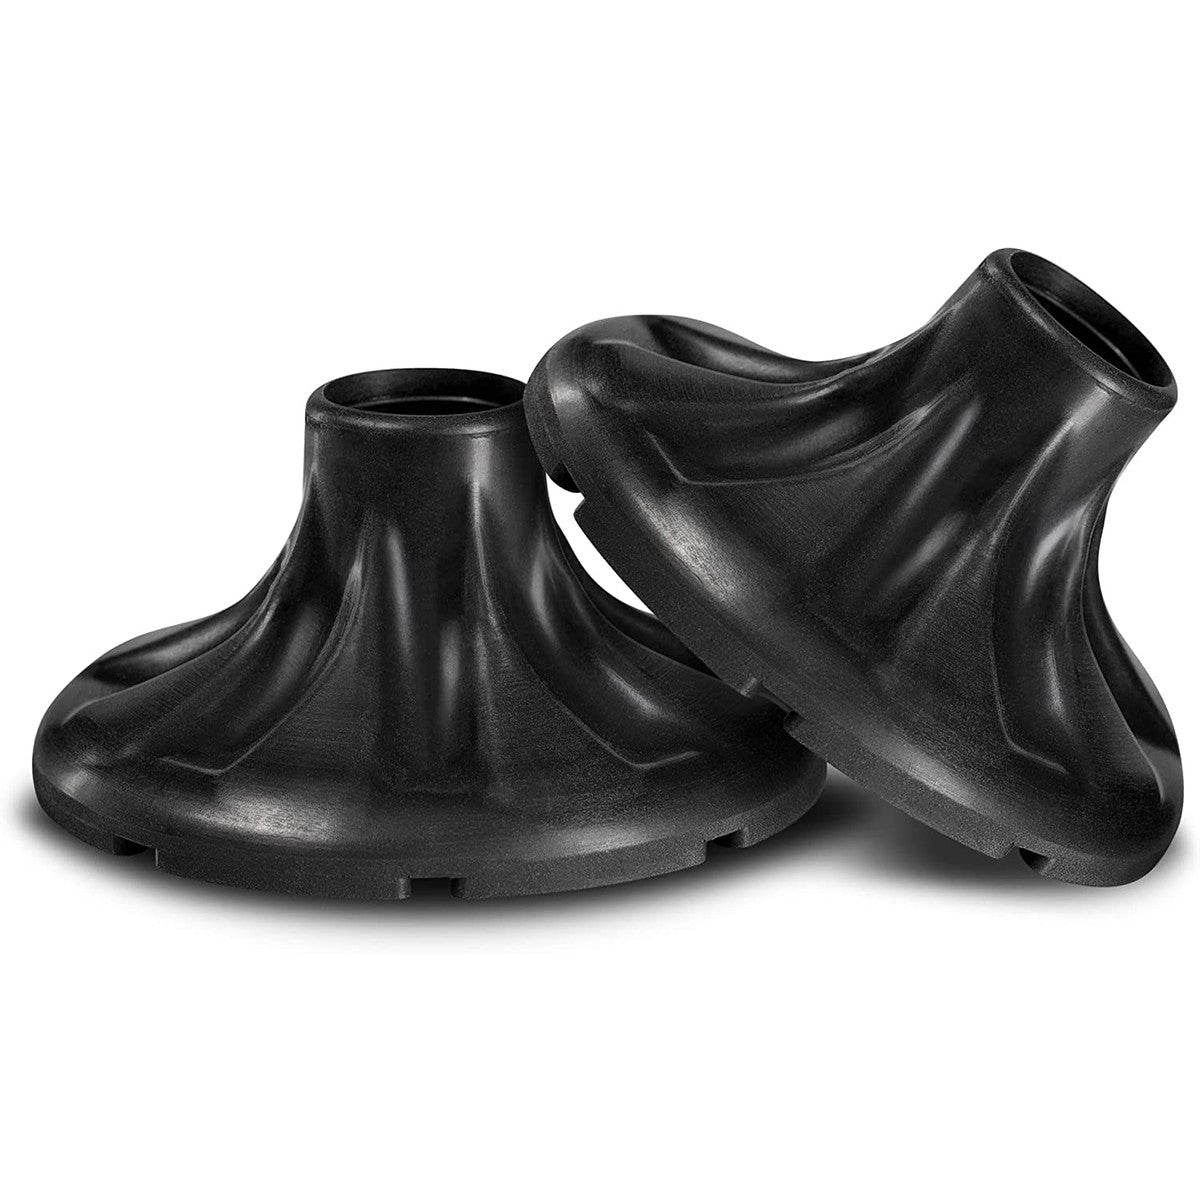 2pcs 7/8" inch Wide Black Cane Rubber Tips